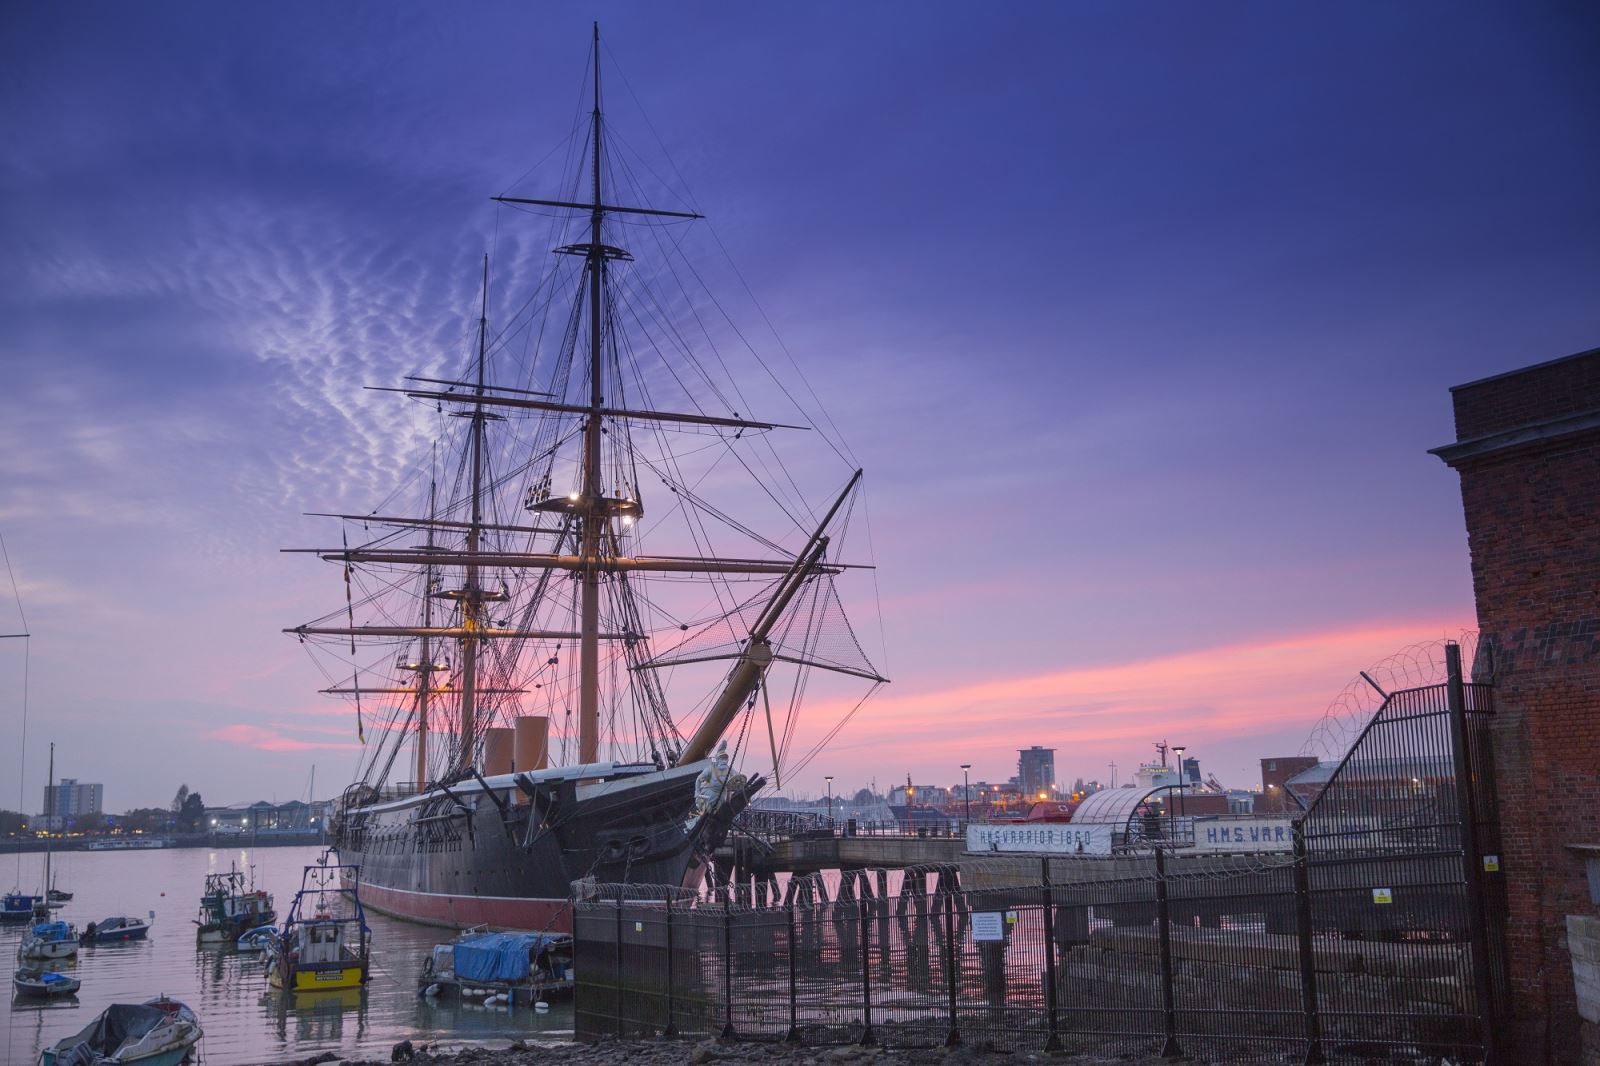 HMS Warrior at dusk, against a purple sky. Image provided by Portsmouth Historic Dockyard